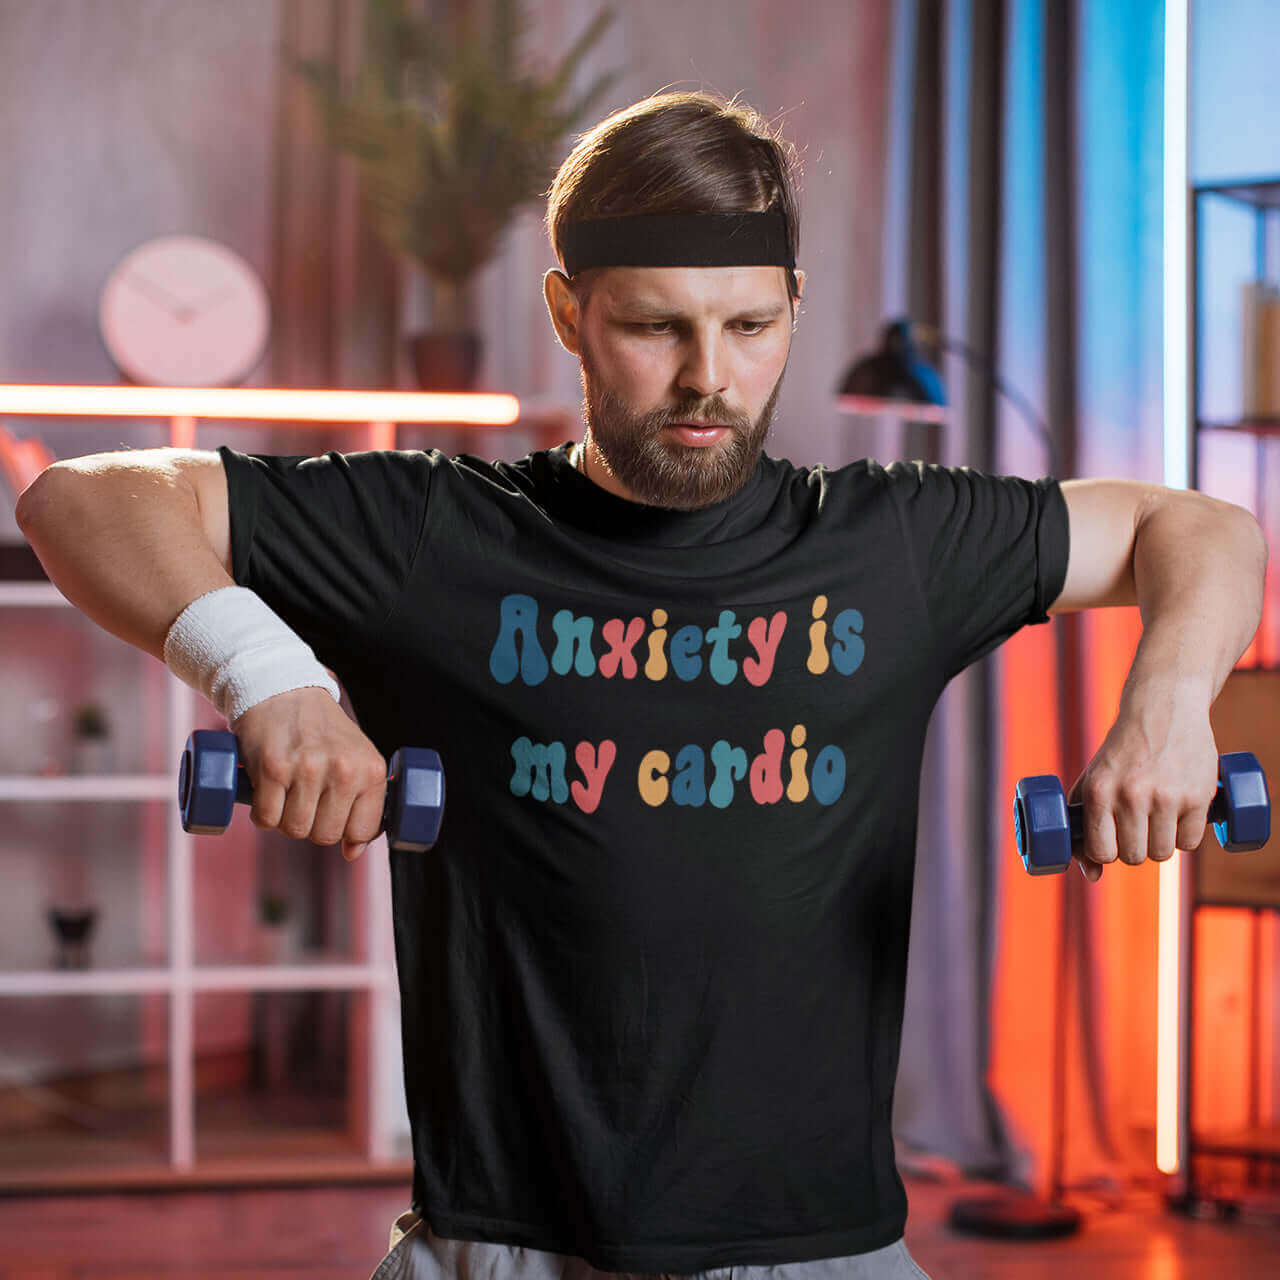 Anxiety is my cardio short sleeve unisex fit t-shirt